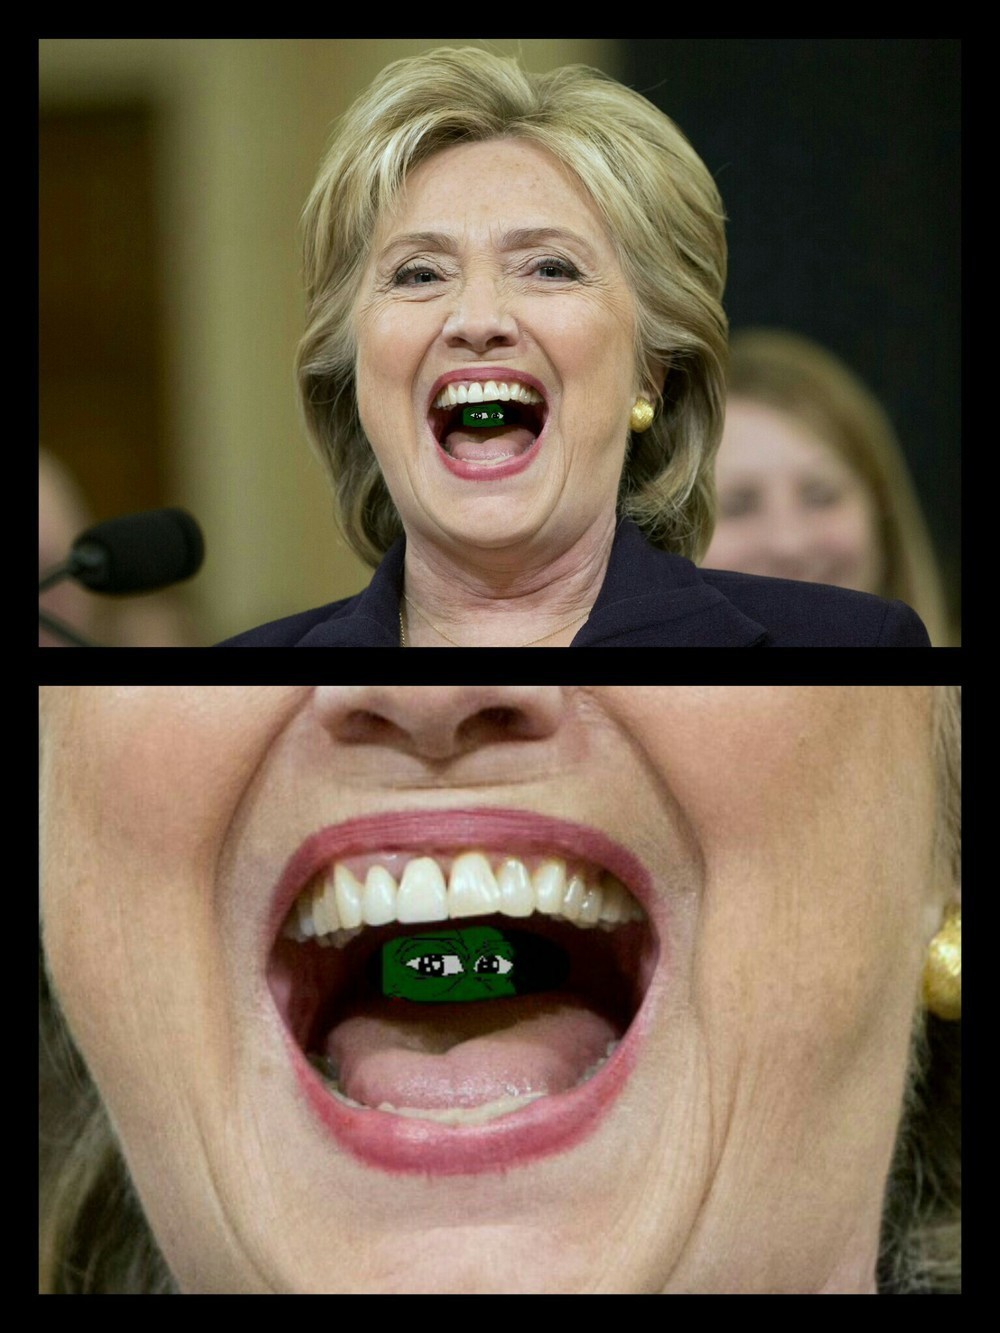 Pepe The Frog Hillary Clinton and Pepe The Frog